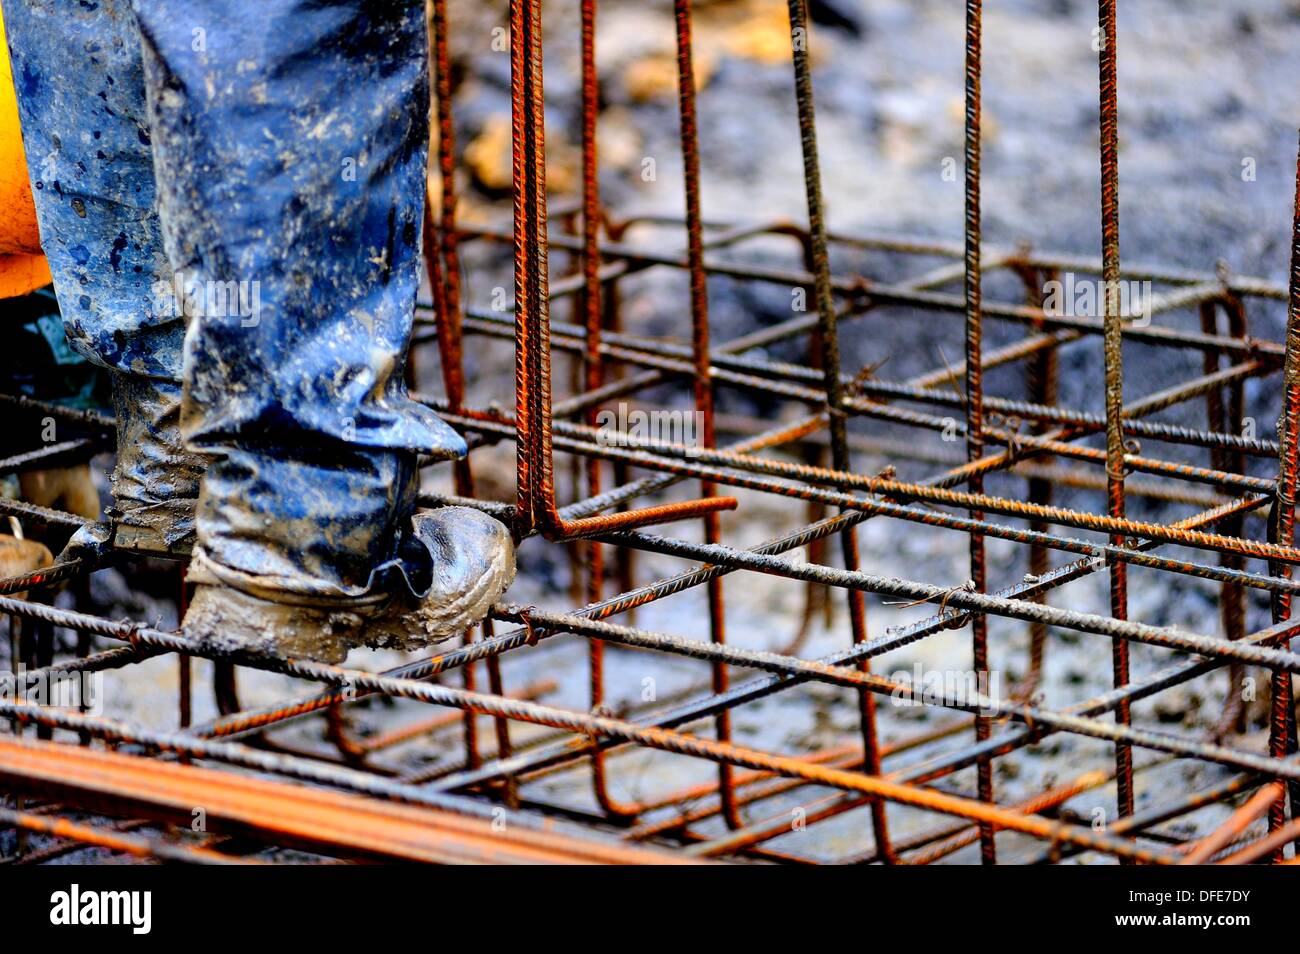 High-contrast image of a construction worker preparing a structure for pouring concrete rebar Stock Photo